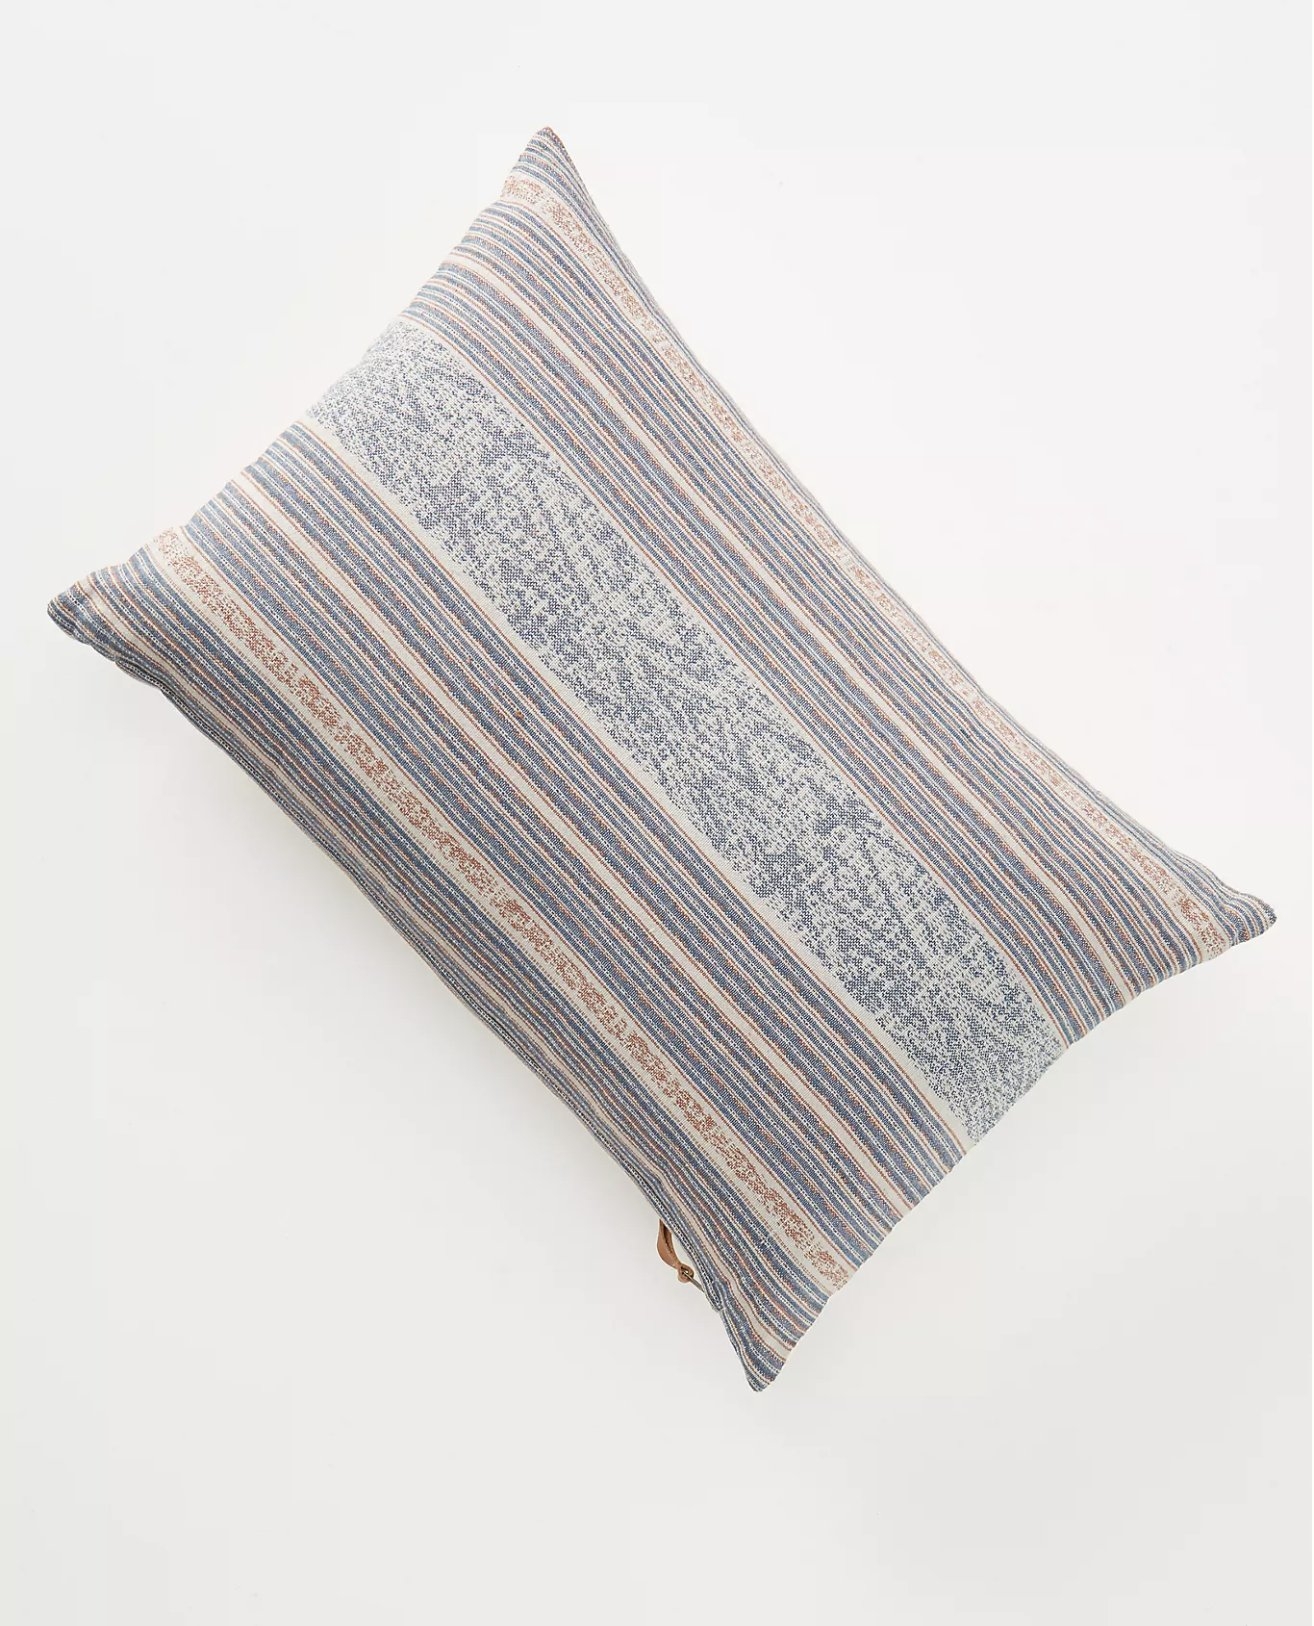 Amber Lewis for Anthropologie Woven Ferndale Pillow - Image 0